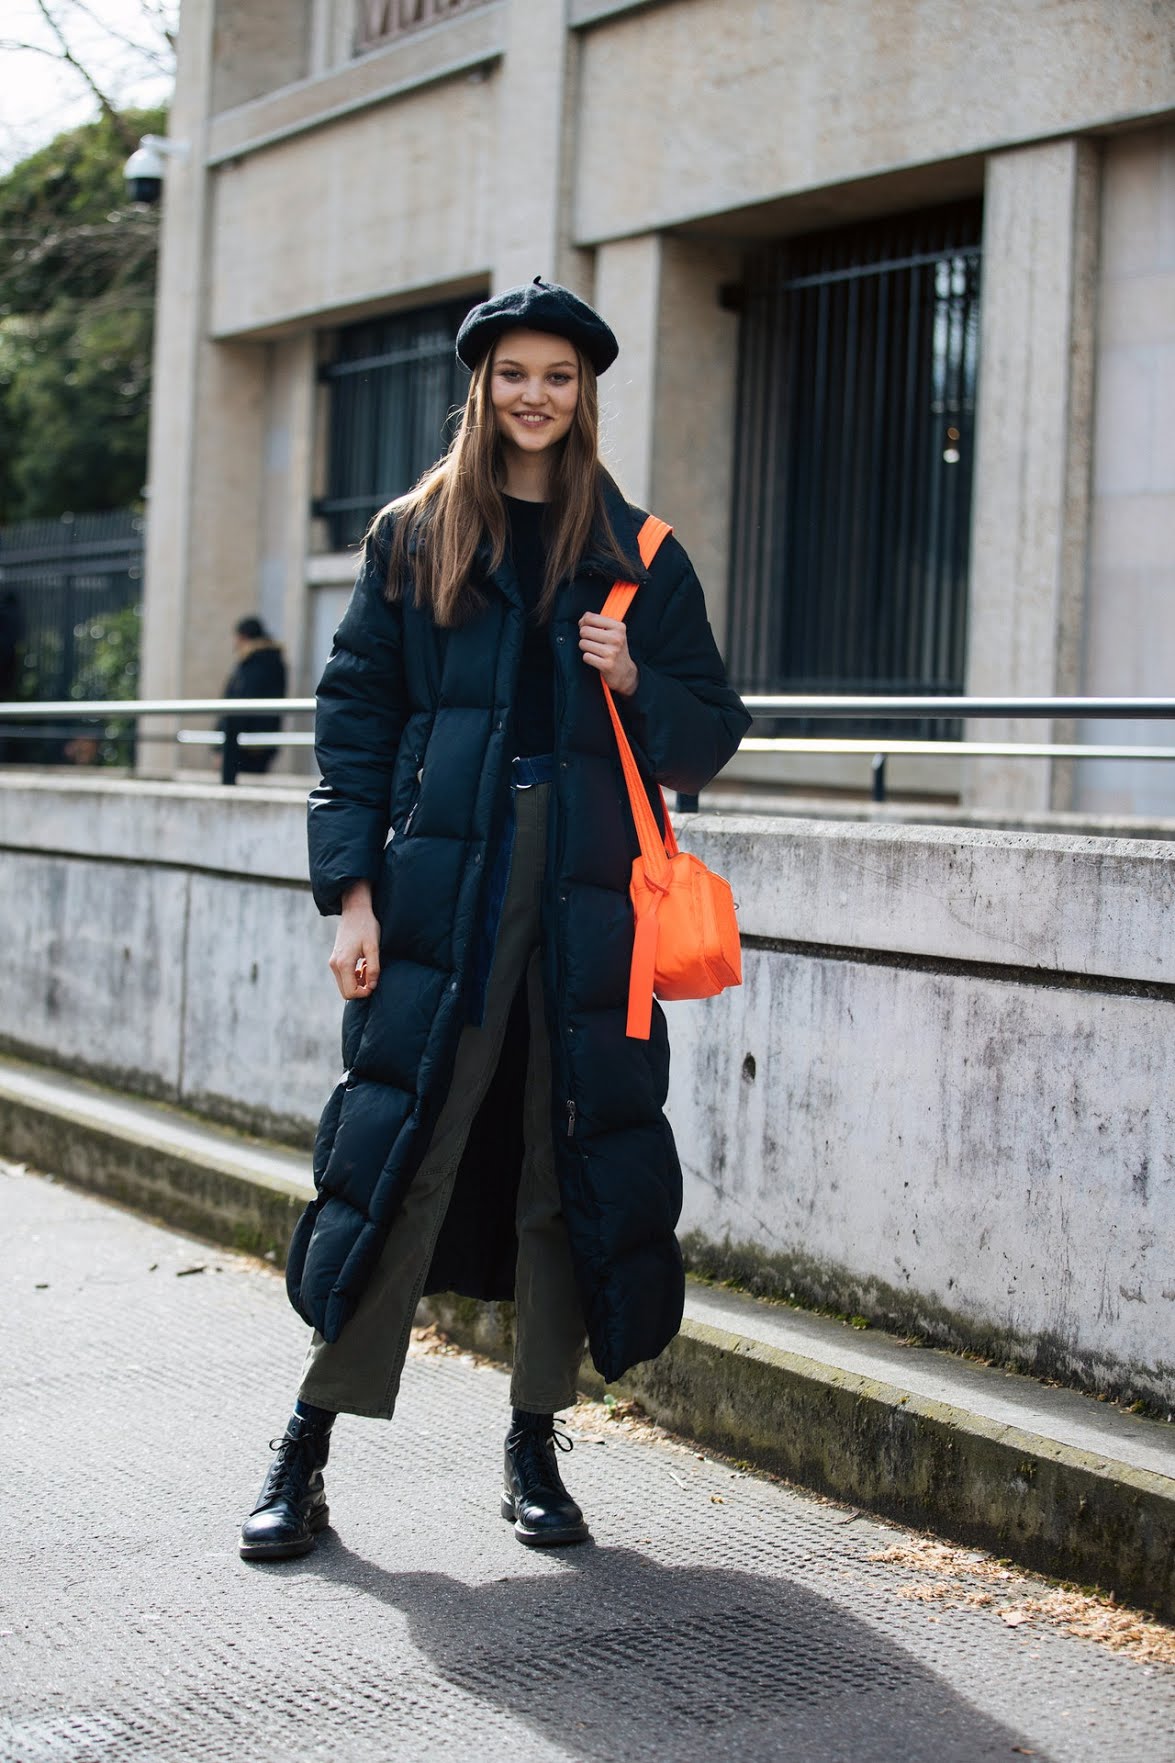 In Fashion | Winter Style Inspiration: Long Puffer Jacket